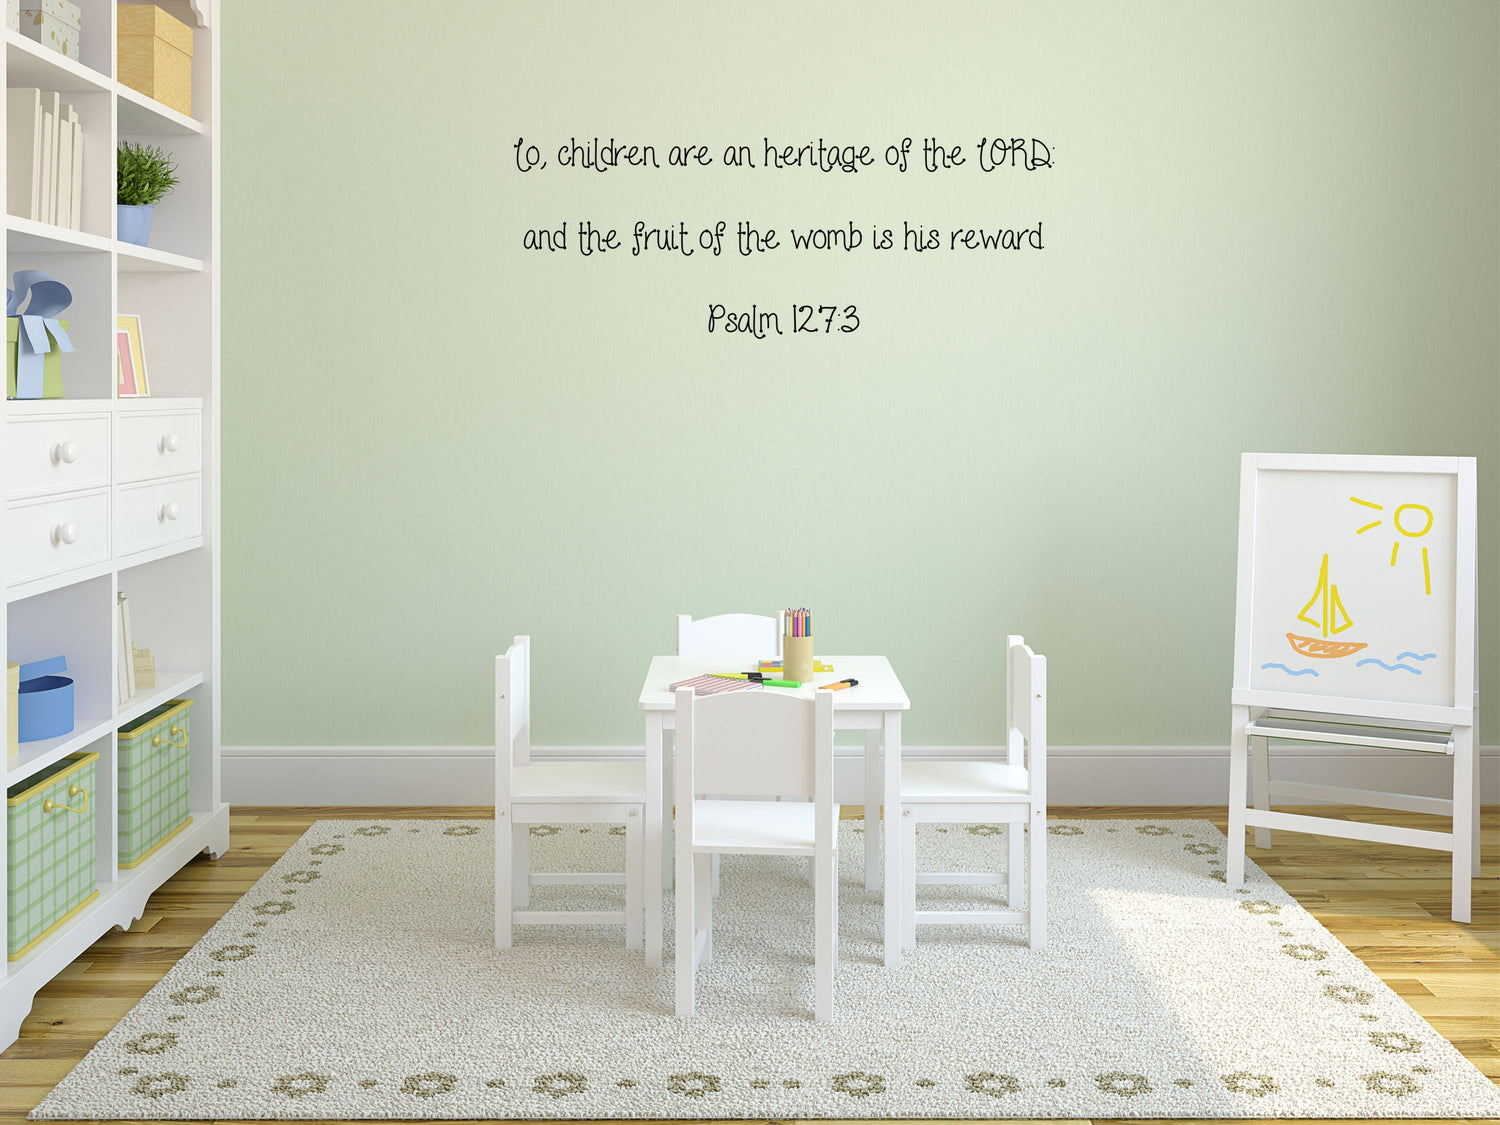 Psalm 127:3 Lo Children Are An Heritage Of The Lord - Scripture Wall Decals Vinyl Wall Decal Inspirational Wall Signs 